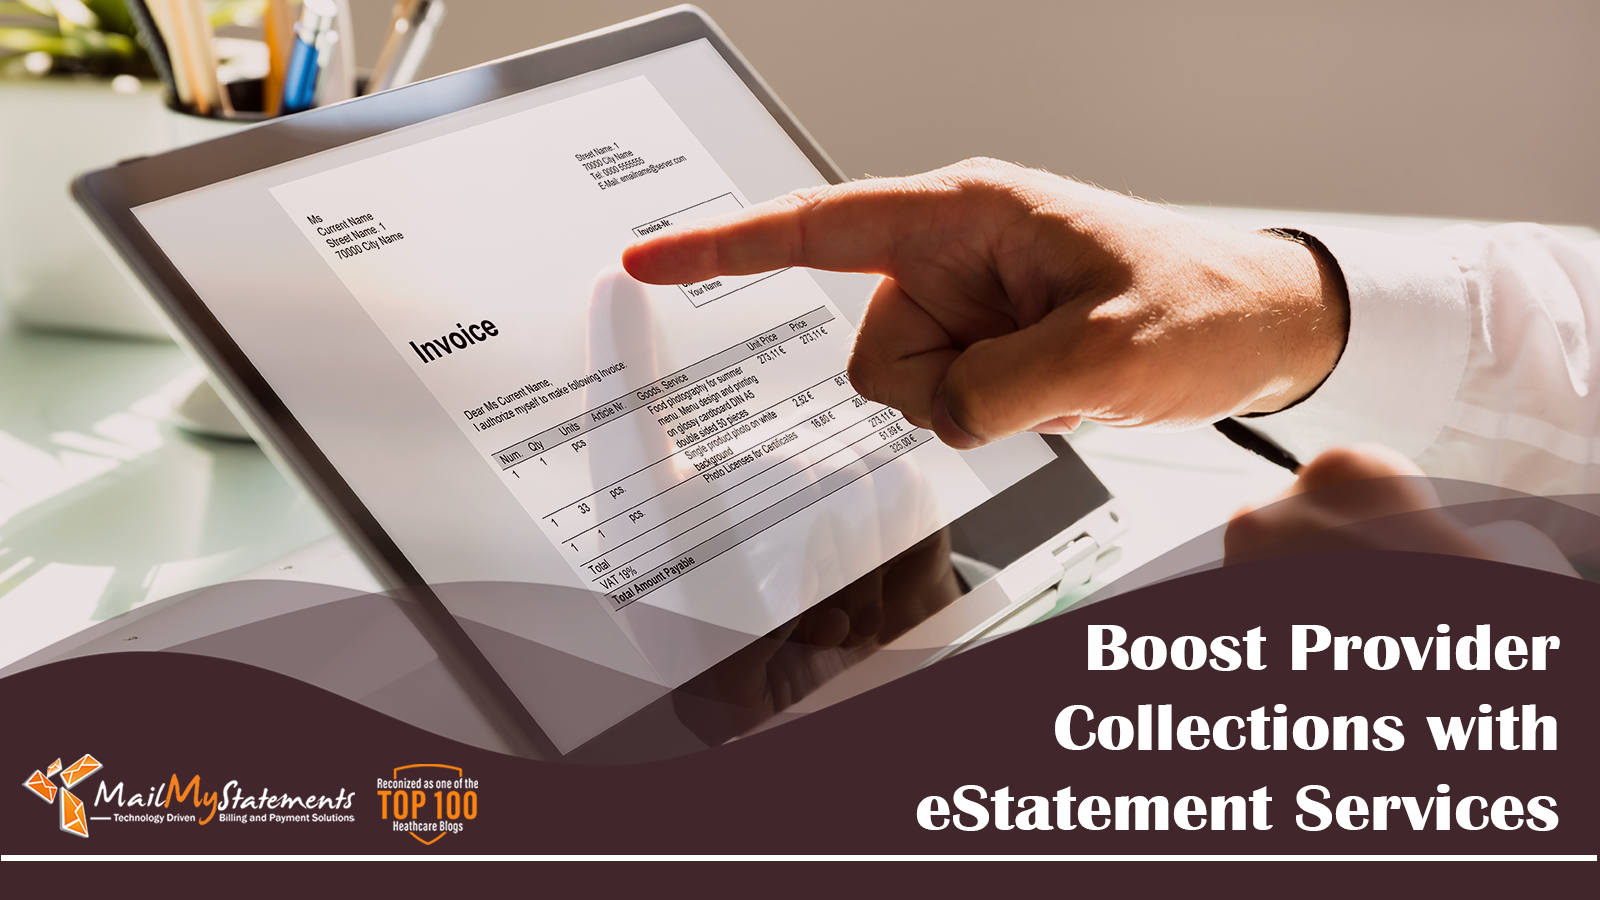 Boost Provider Collections with eStatement Services [Infographic]